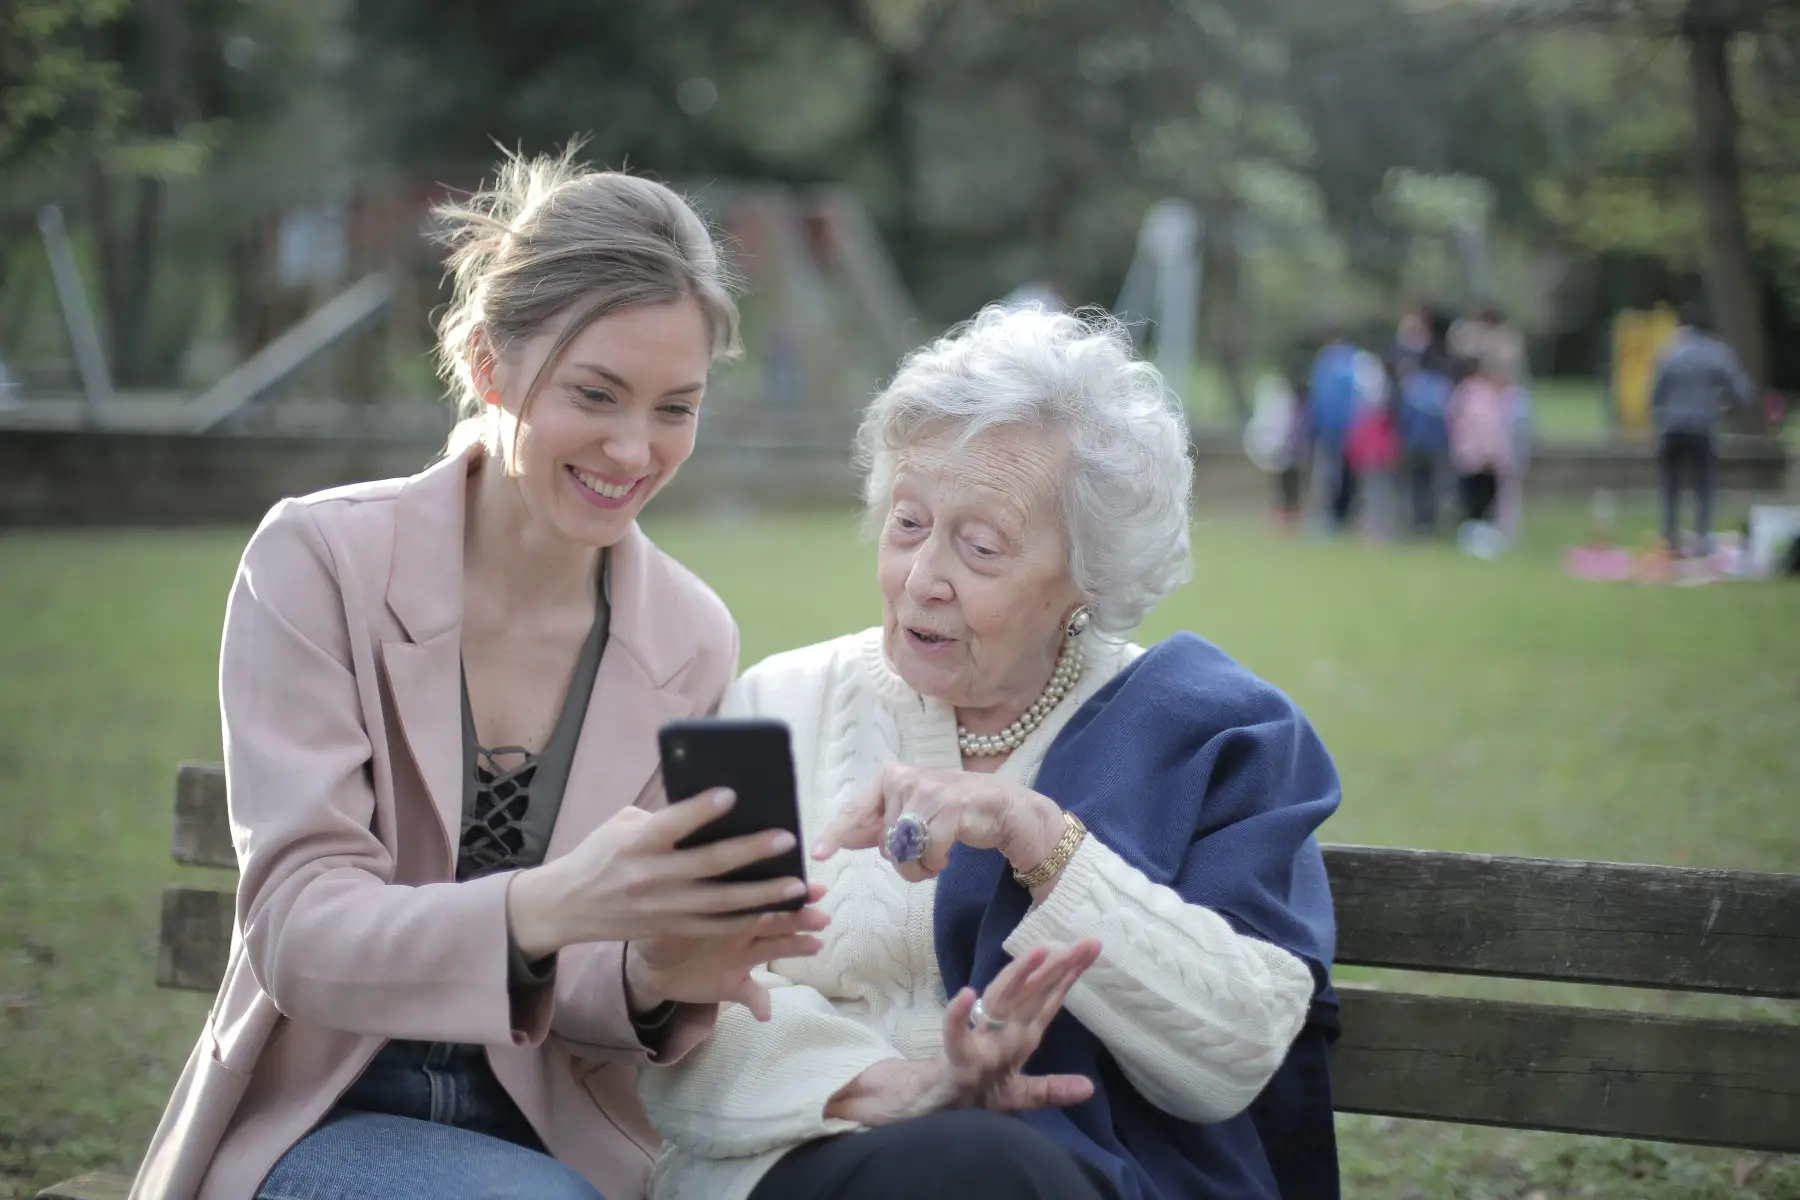 Adult daughter showing mother or grandmother how to order groceries using mobile phone apps. Sitting on a park bench.